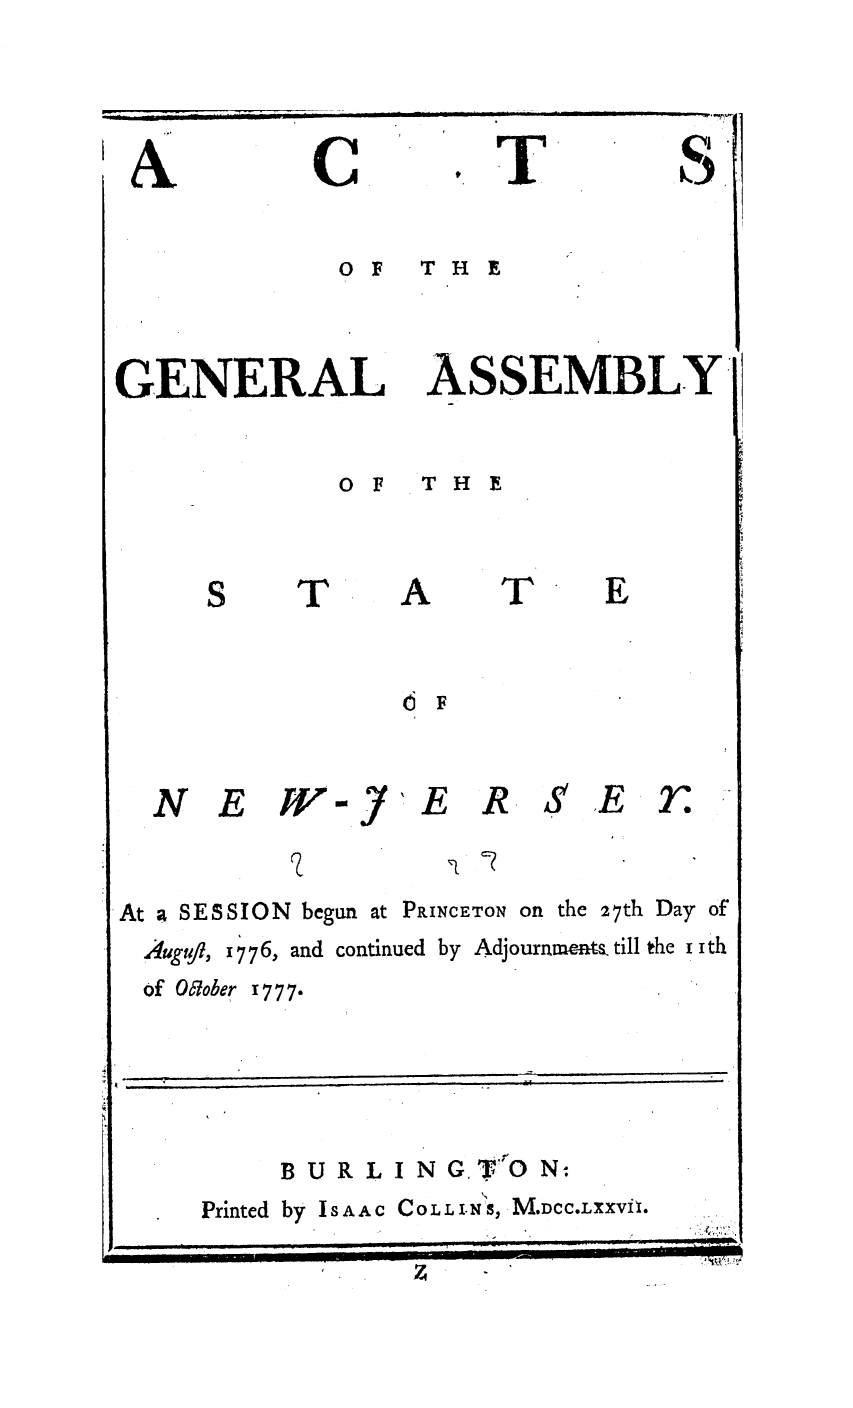 handle is hein.ssl/ssnj0219 and id is 1 raw text is: tAC' .T

Q°

O    T H E
GENERAL ASSEMBLY
OF   THE
S     T      A     T      E
6 F
N E      W-J'E r ER          E r
At a SESSION begun at PRINCETON on the 27th Day of
Augufl/, 1776, and continued by Adjournments. till the iith
of Ogober 1777

BURL I NG T'O N
Printed by ISAAC COLLI-NS, M.DCC.LXXVII.

r--


